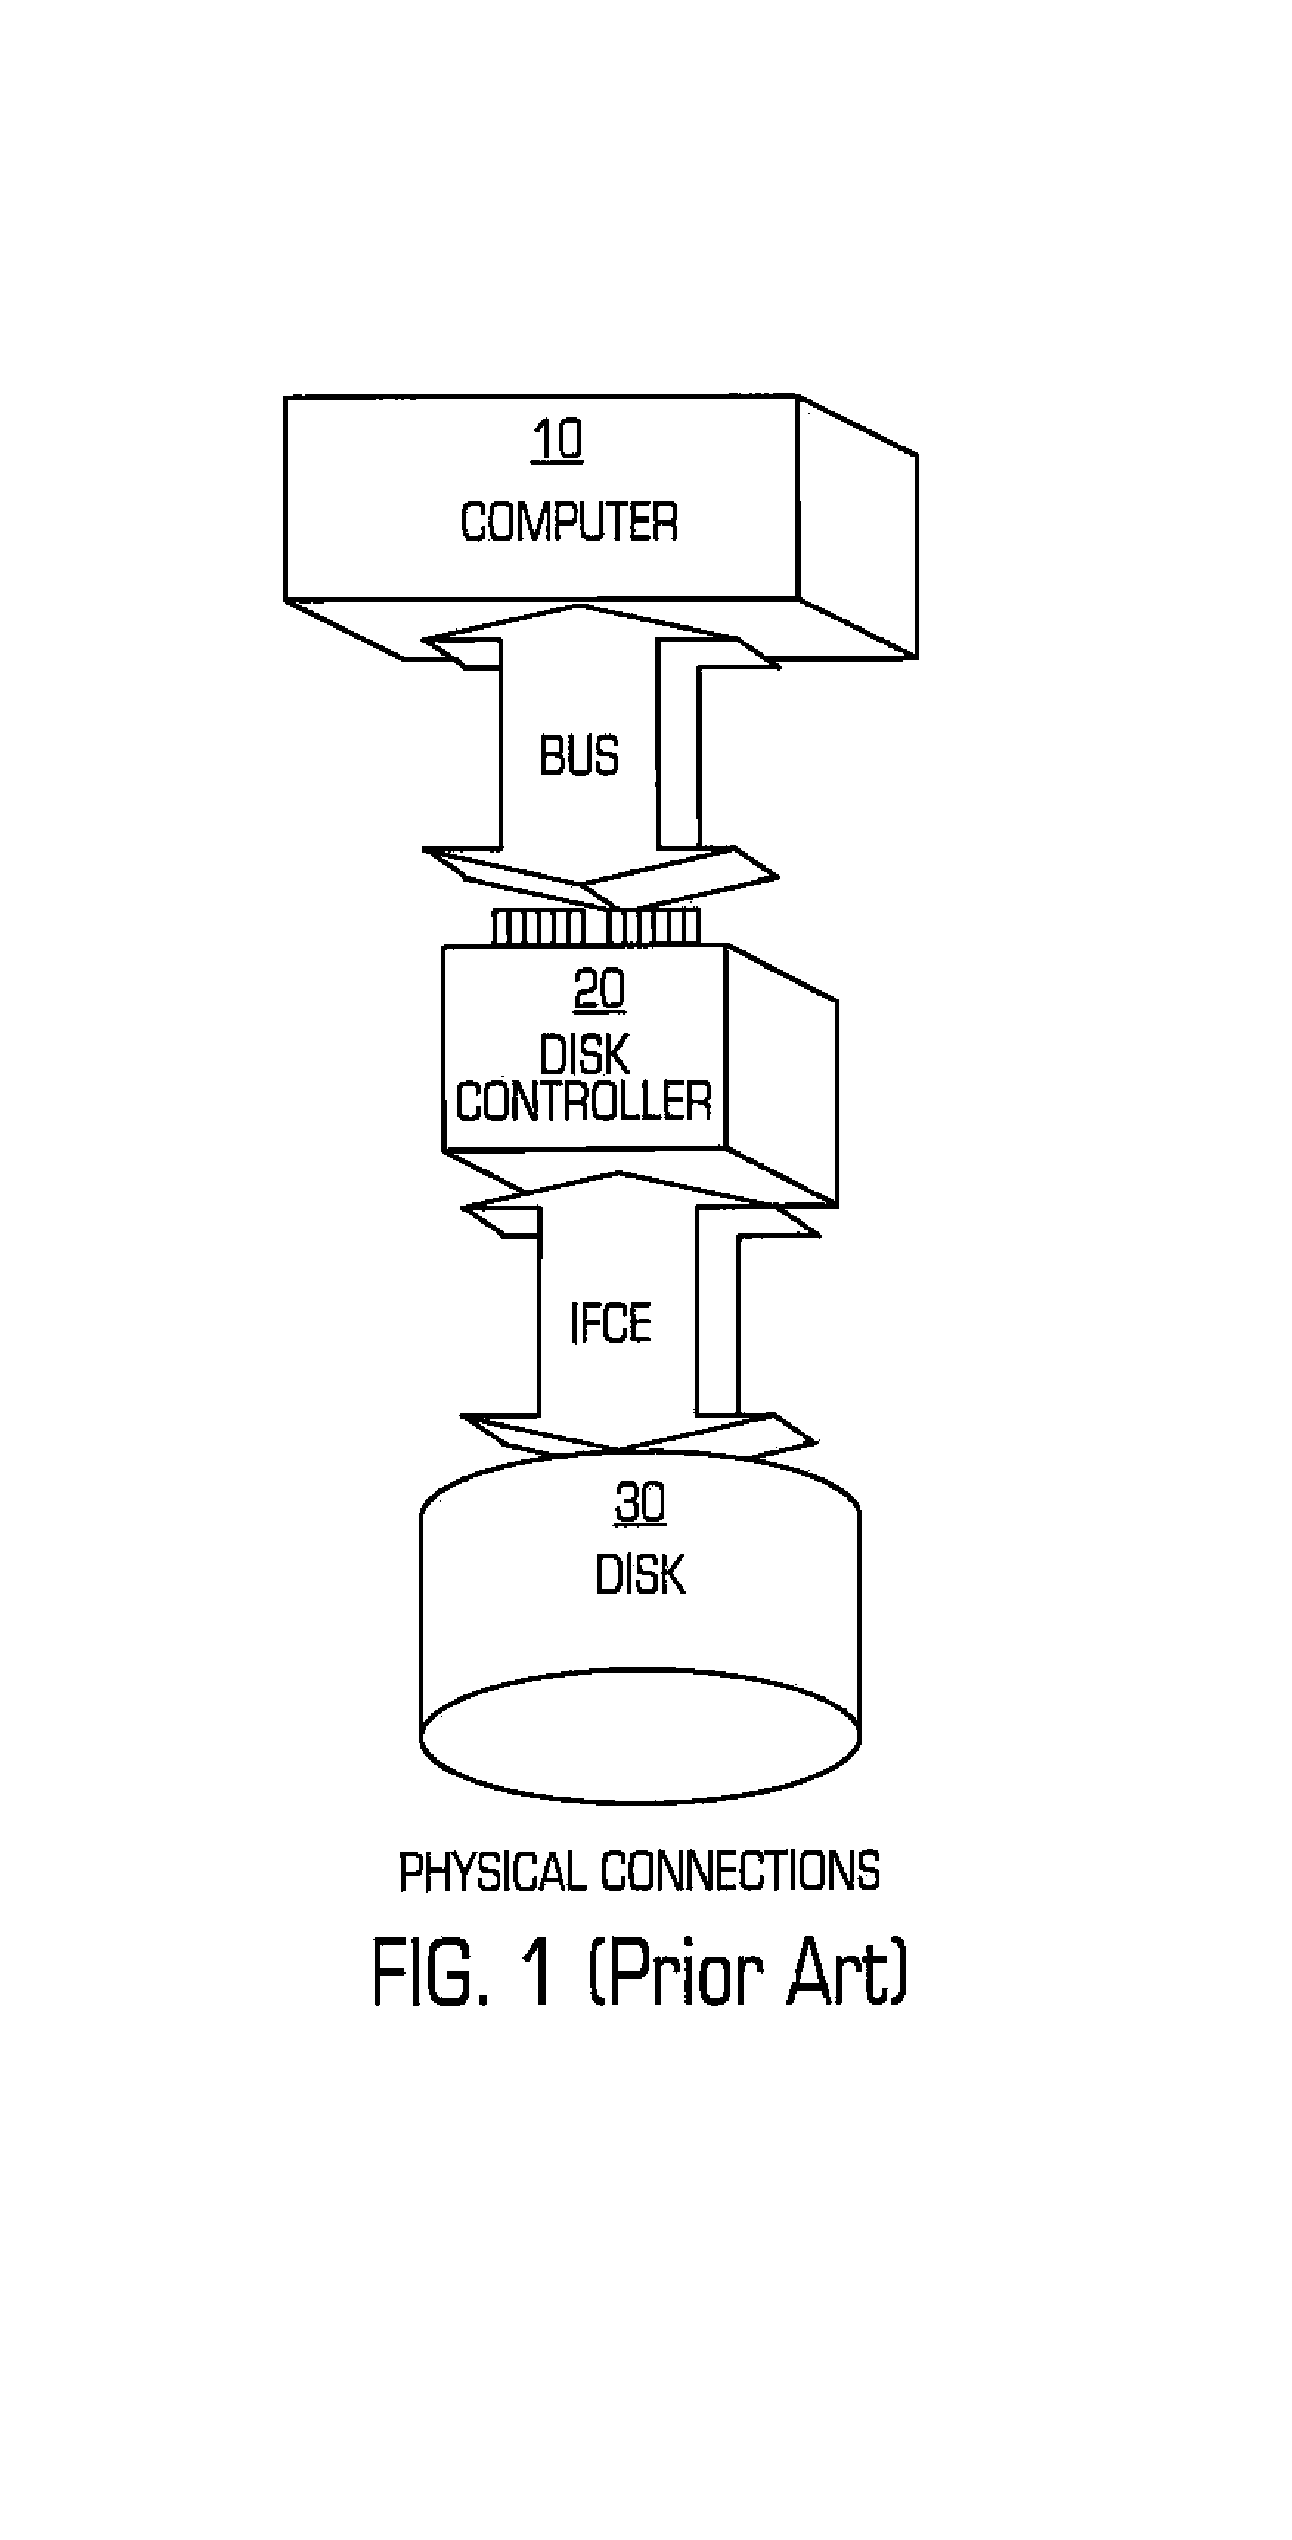 Transaction-based storage system and method that uses variable sized objects to store data